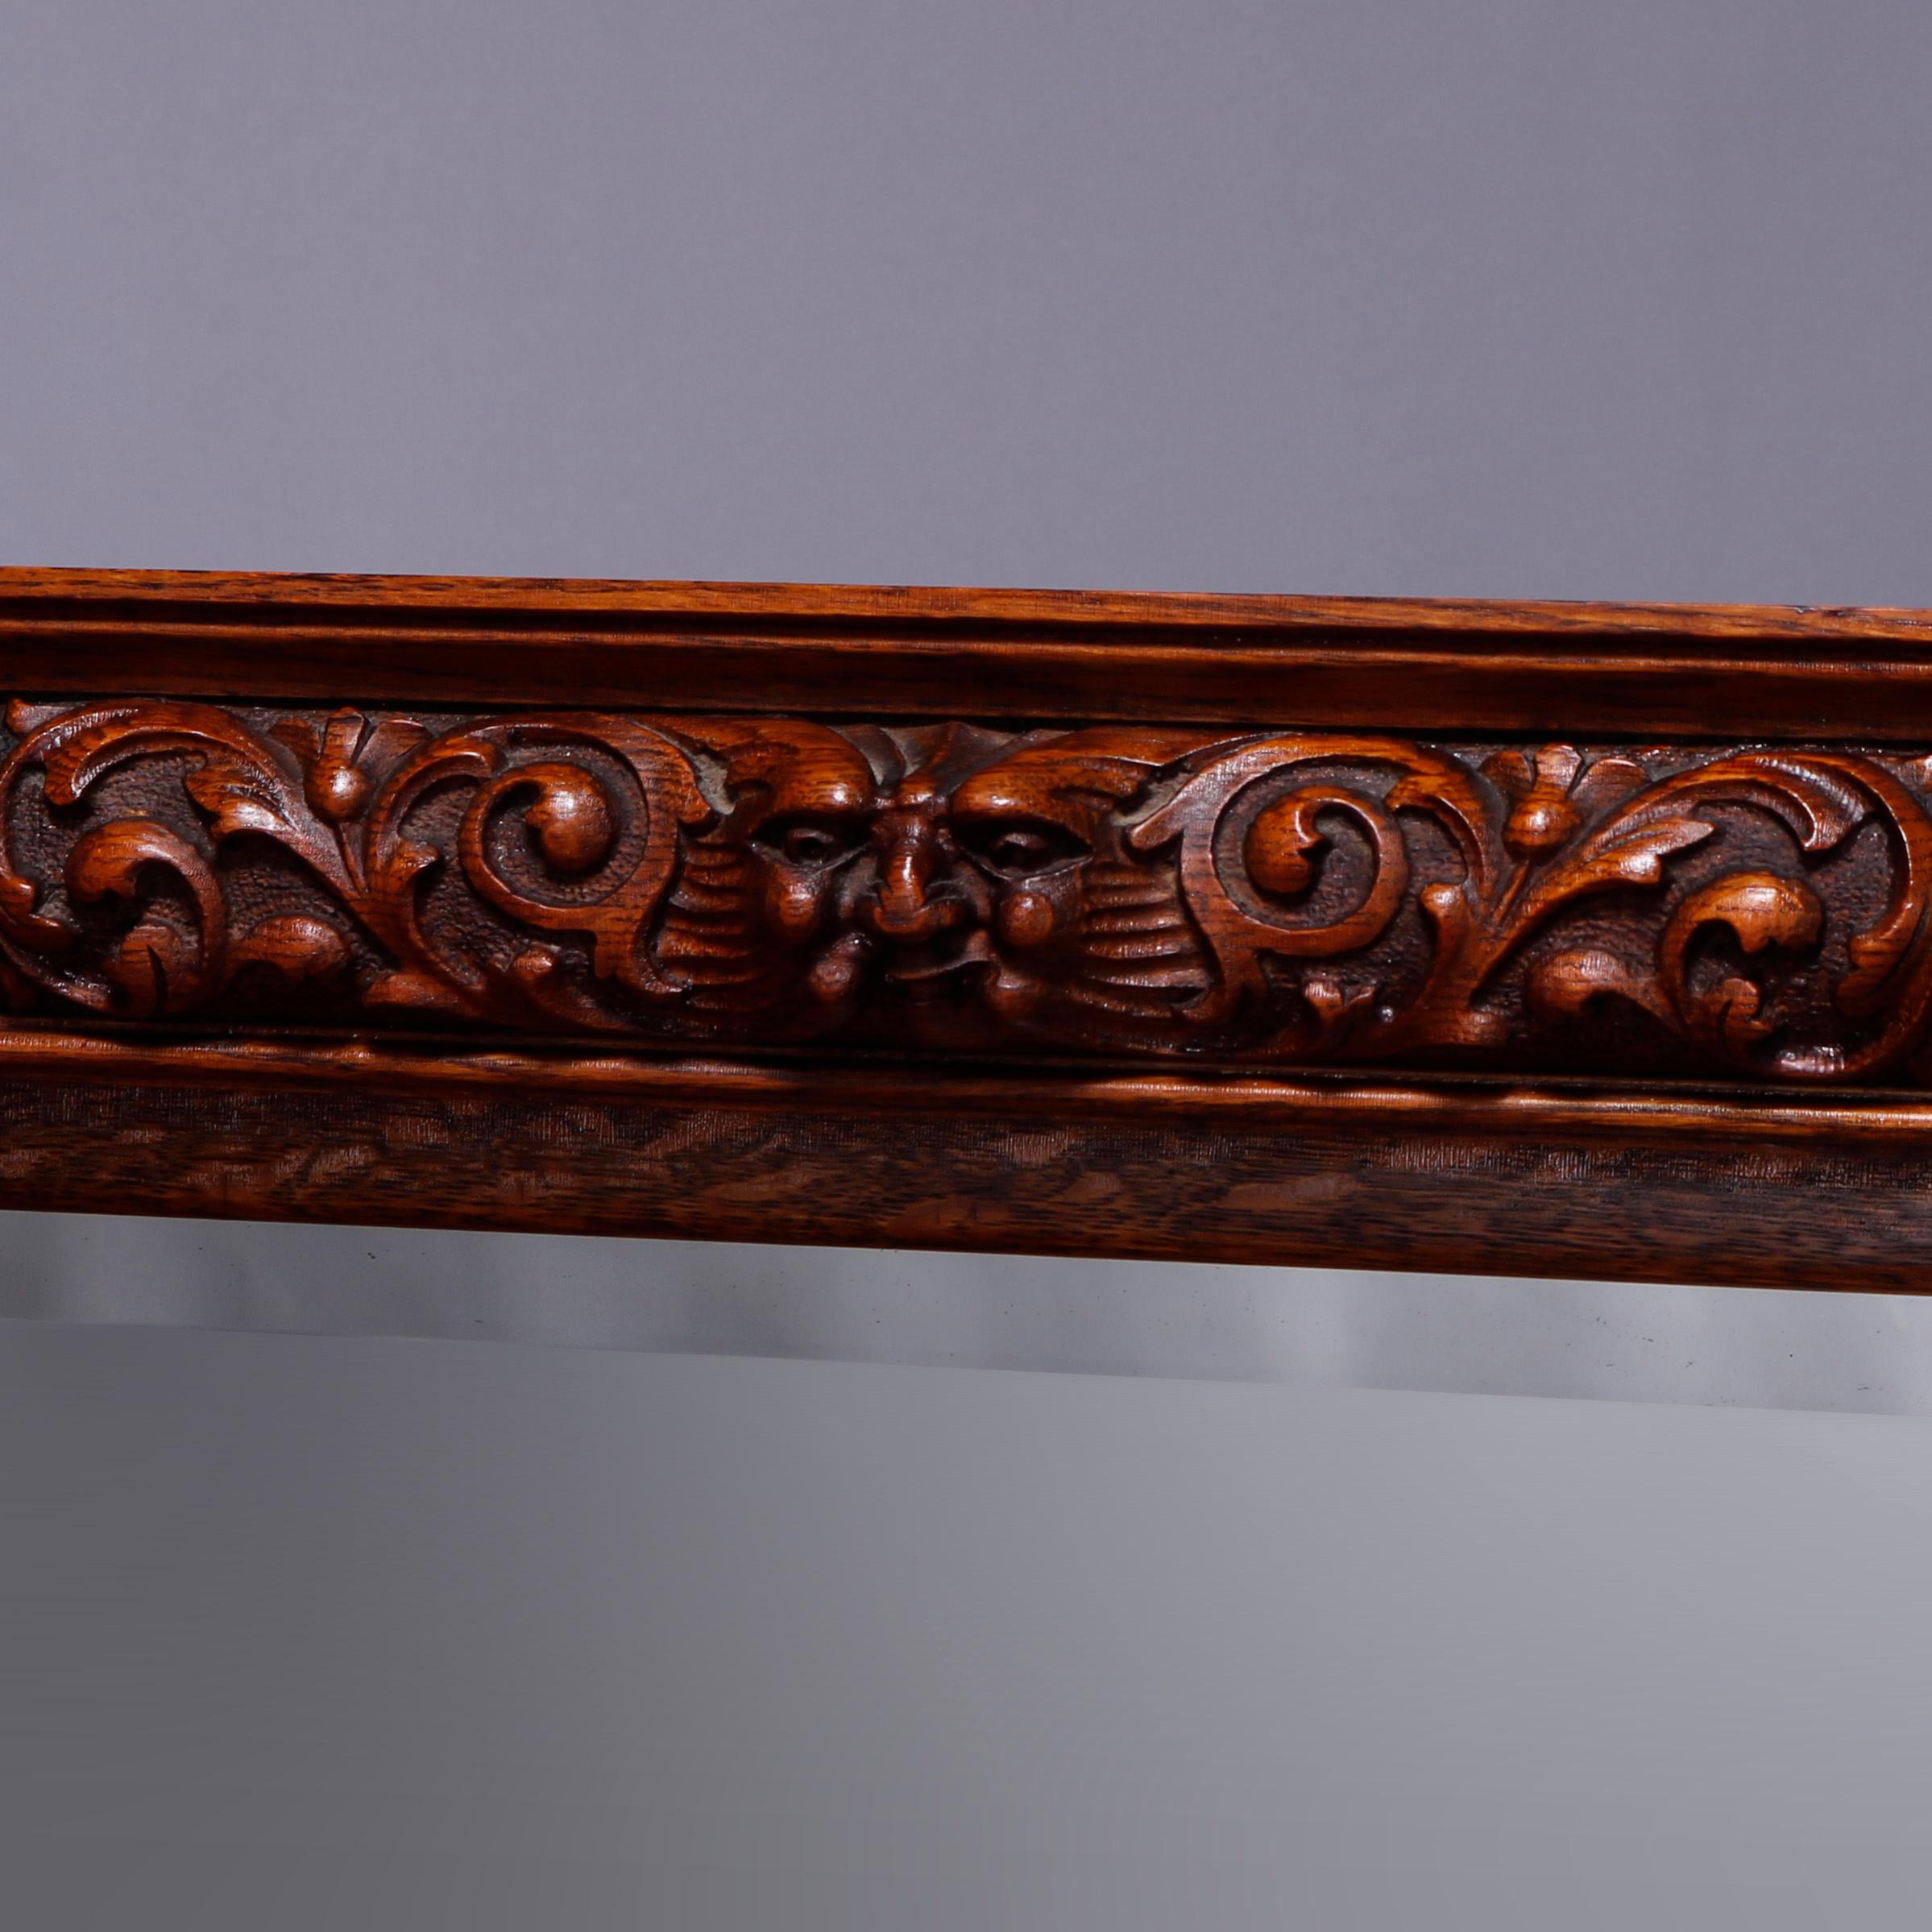 An antique sideboard in the manner of RJ Horner offers quarter sawn oak construction with carved frieze having central grotesque mask flanked by foliate elements over oval mirror surmounting lower case having convex double drawers over long drawer